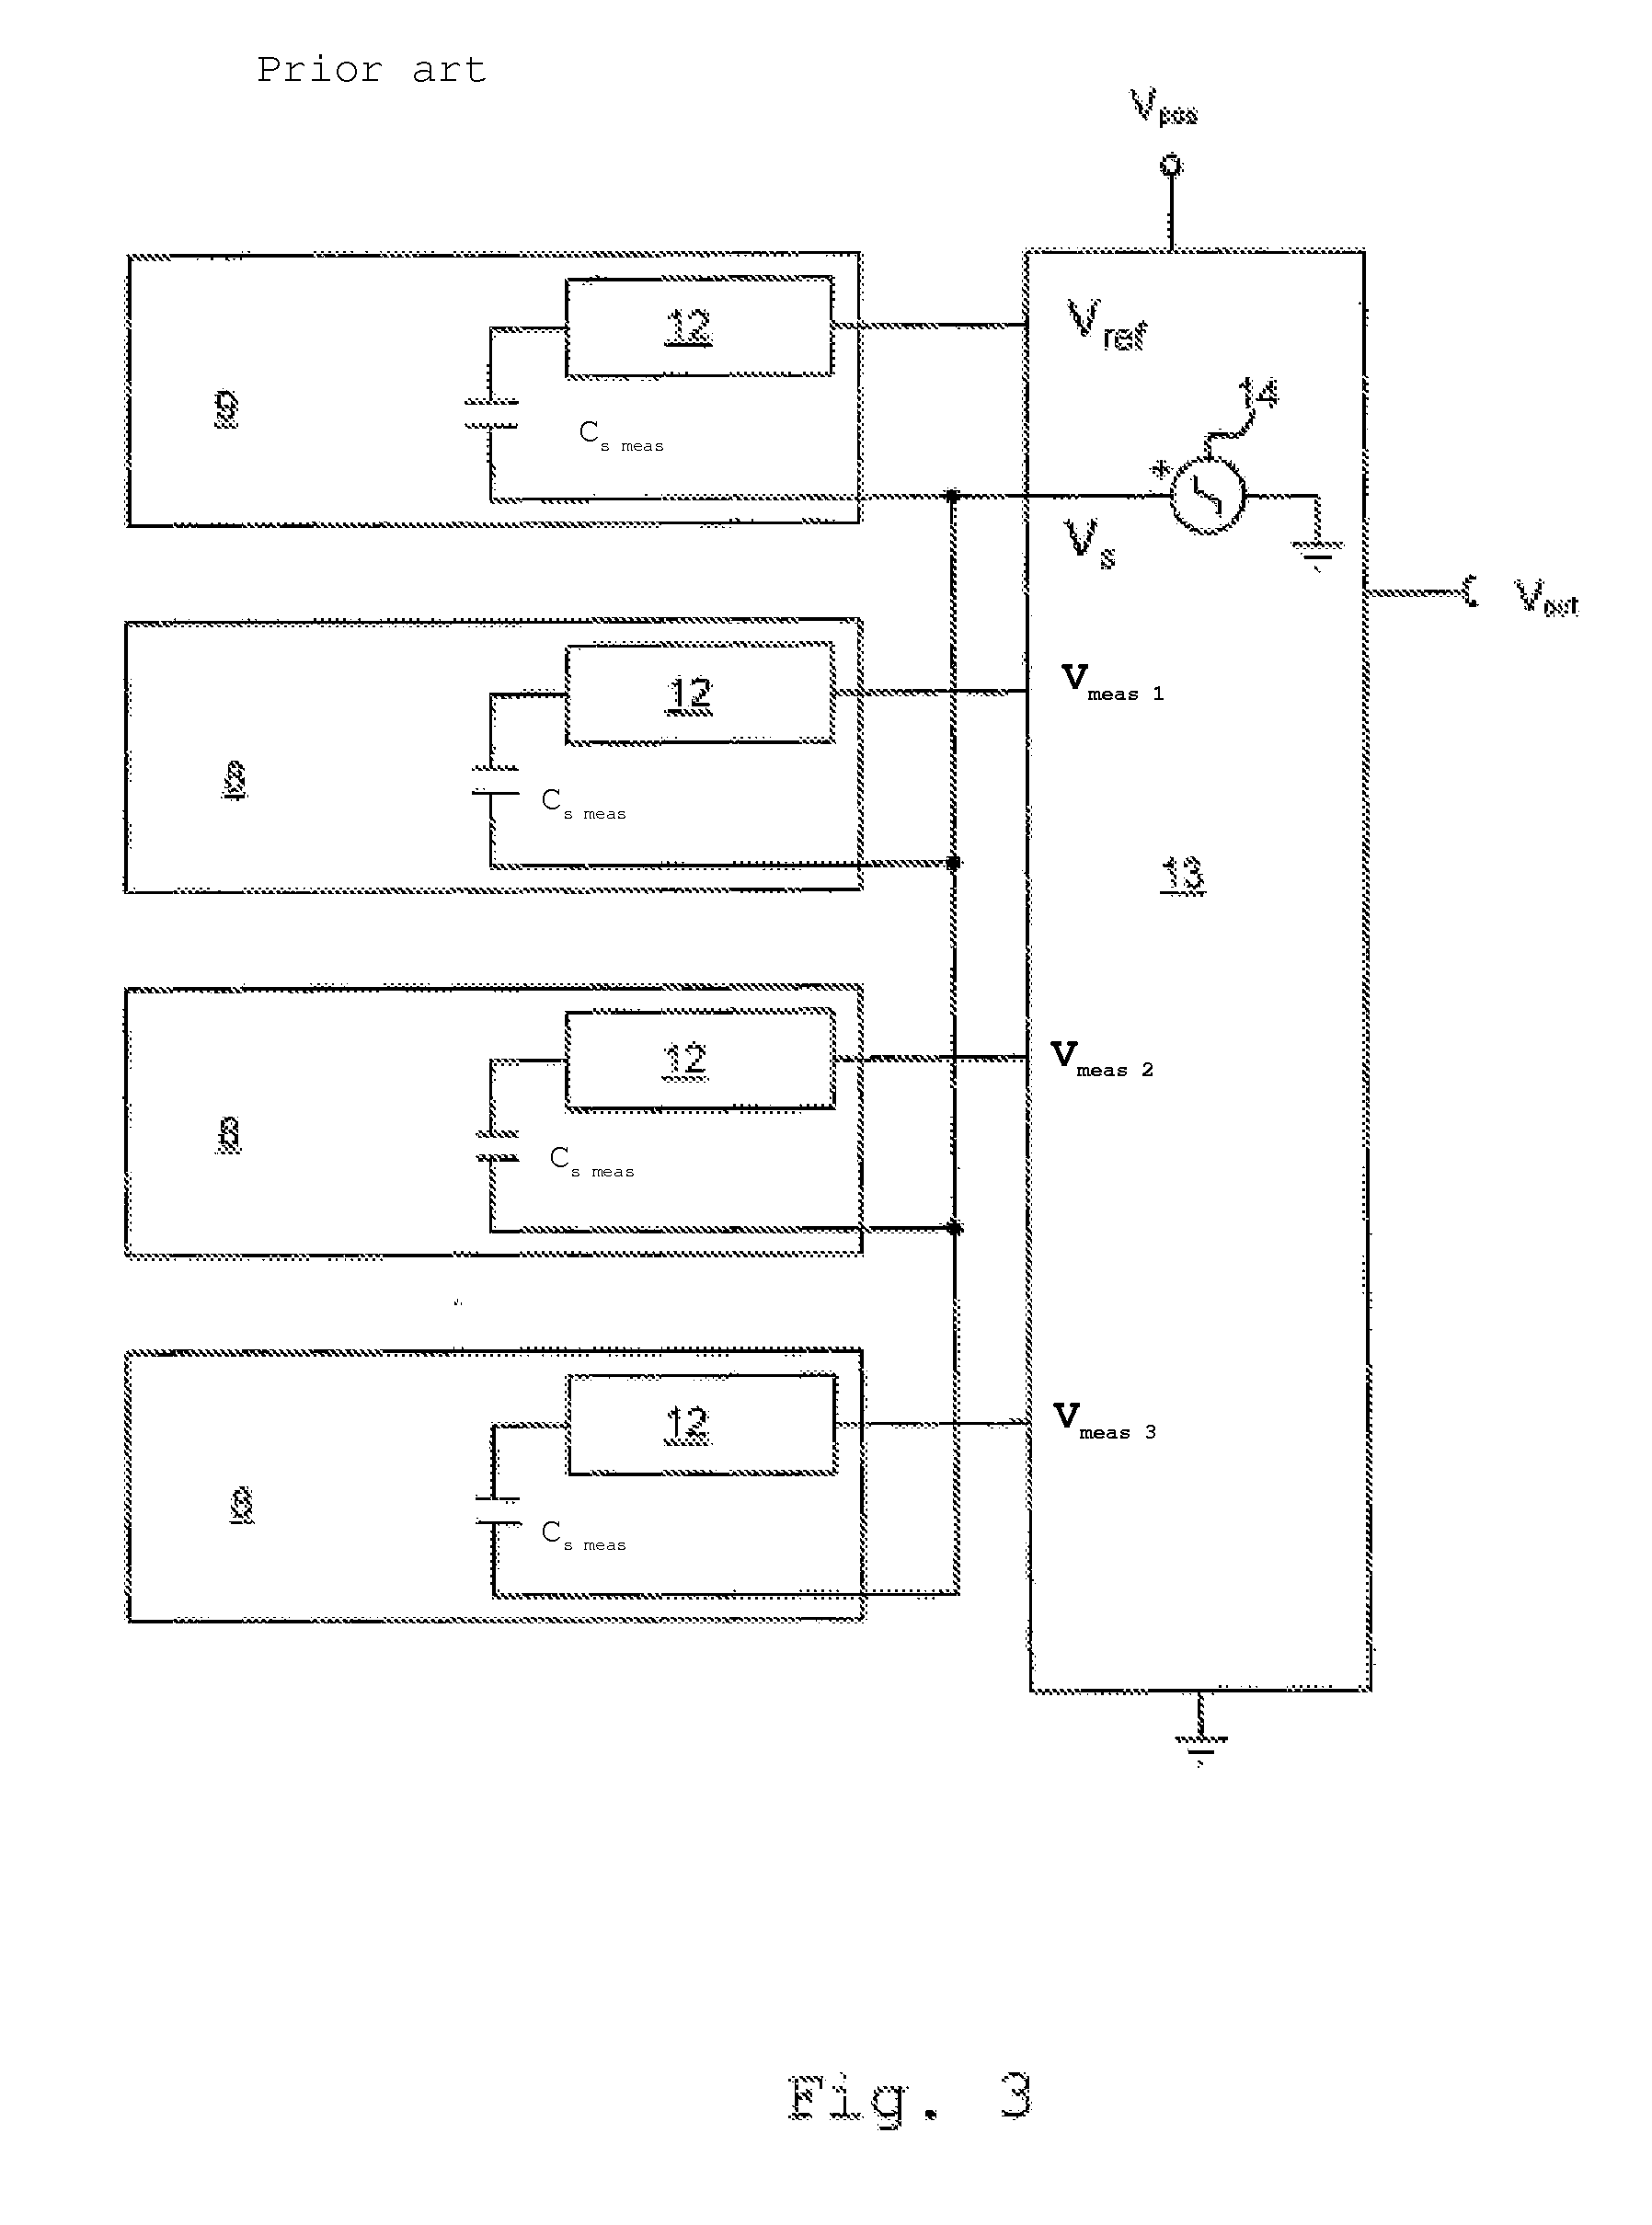 System for measuring a physical variable